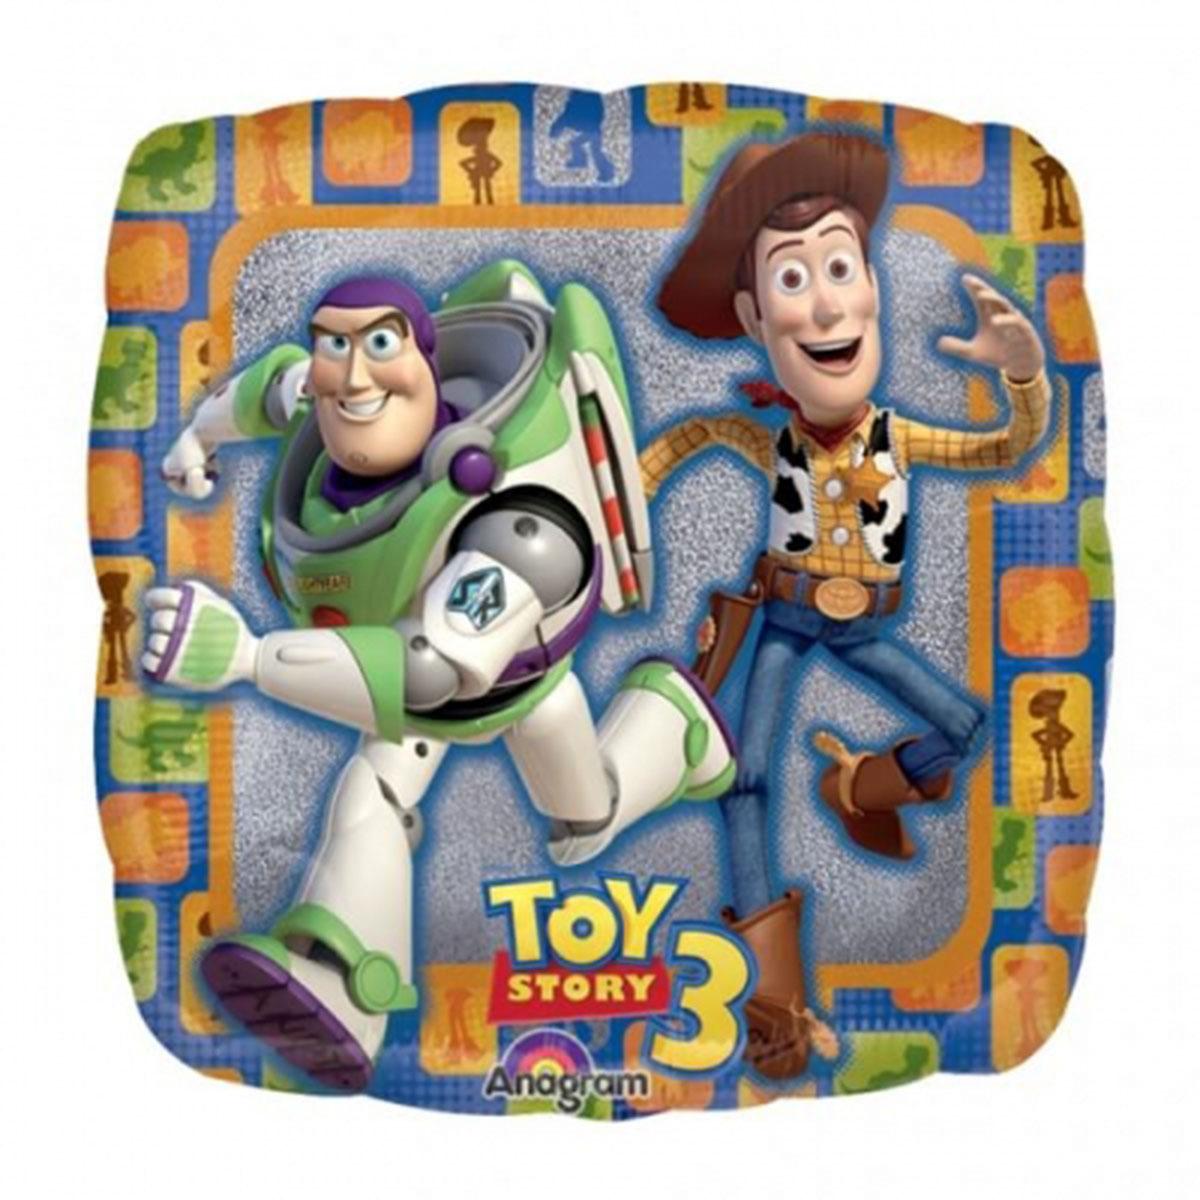 Toy Story 3 Group Holographic Balloon 18in Balloons & Streamers - Party Centre - Party Centre